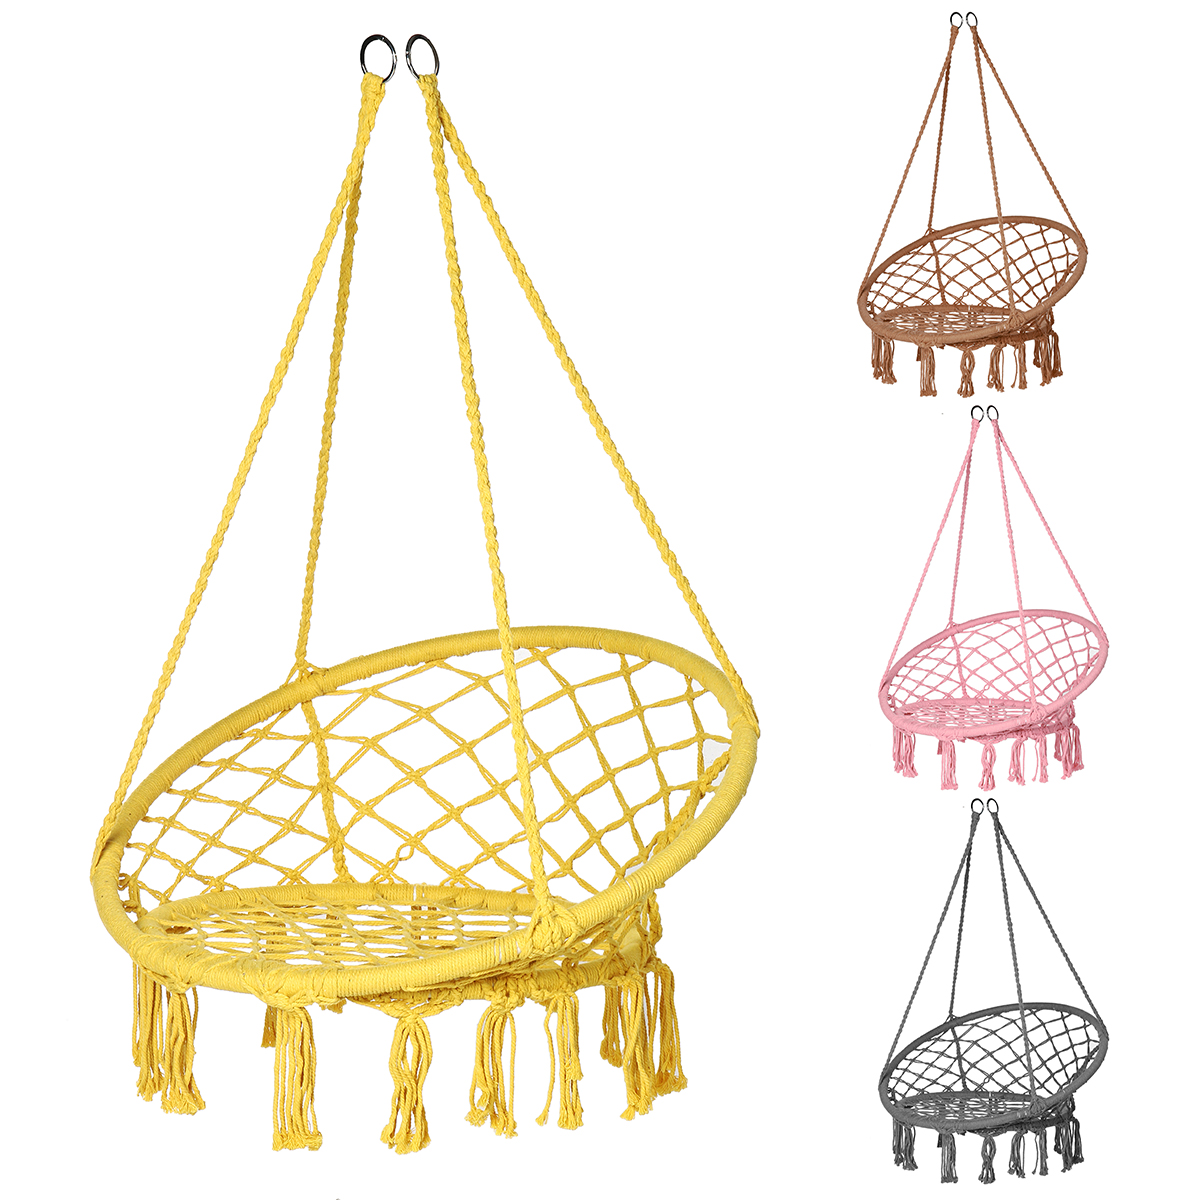 Hammock Chair with Fringe Tassels,Exquisite Dreamy Round Hanging Chair,Cotton Rope Macrame Swing Chairs for Indoor/Outdoor Bedroom Patio Deck or Garden,Handwoven Hammock Hanging Chair Swing - image 1 of 4